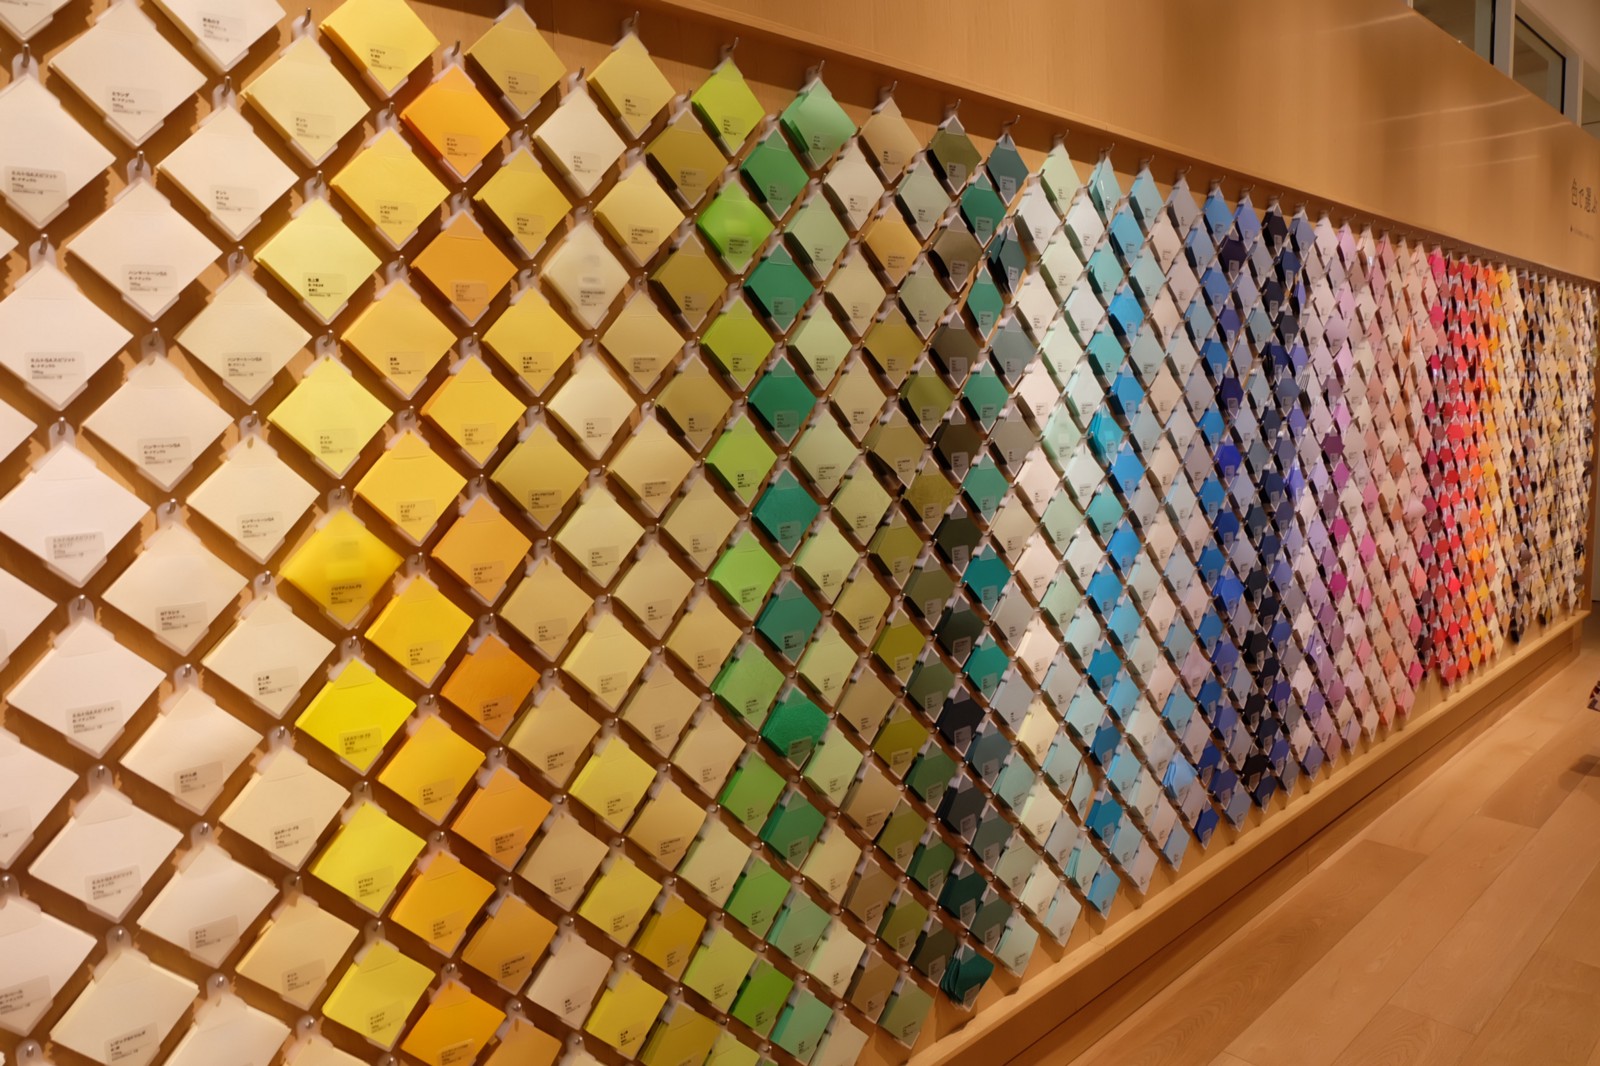 Colourful papers at Itoya in Ginza, Tokyo